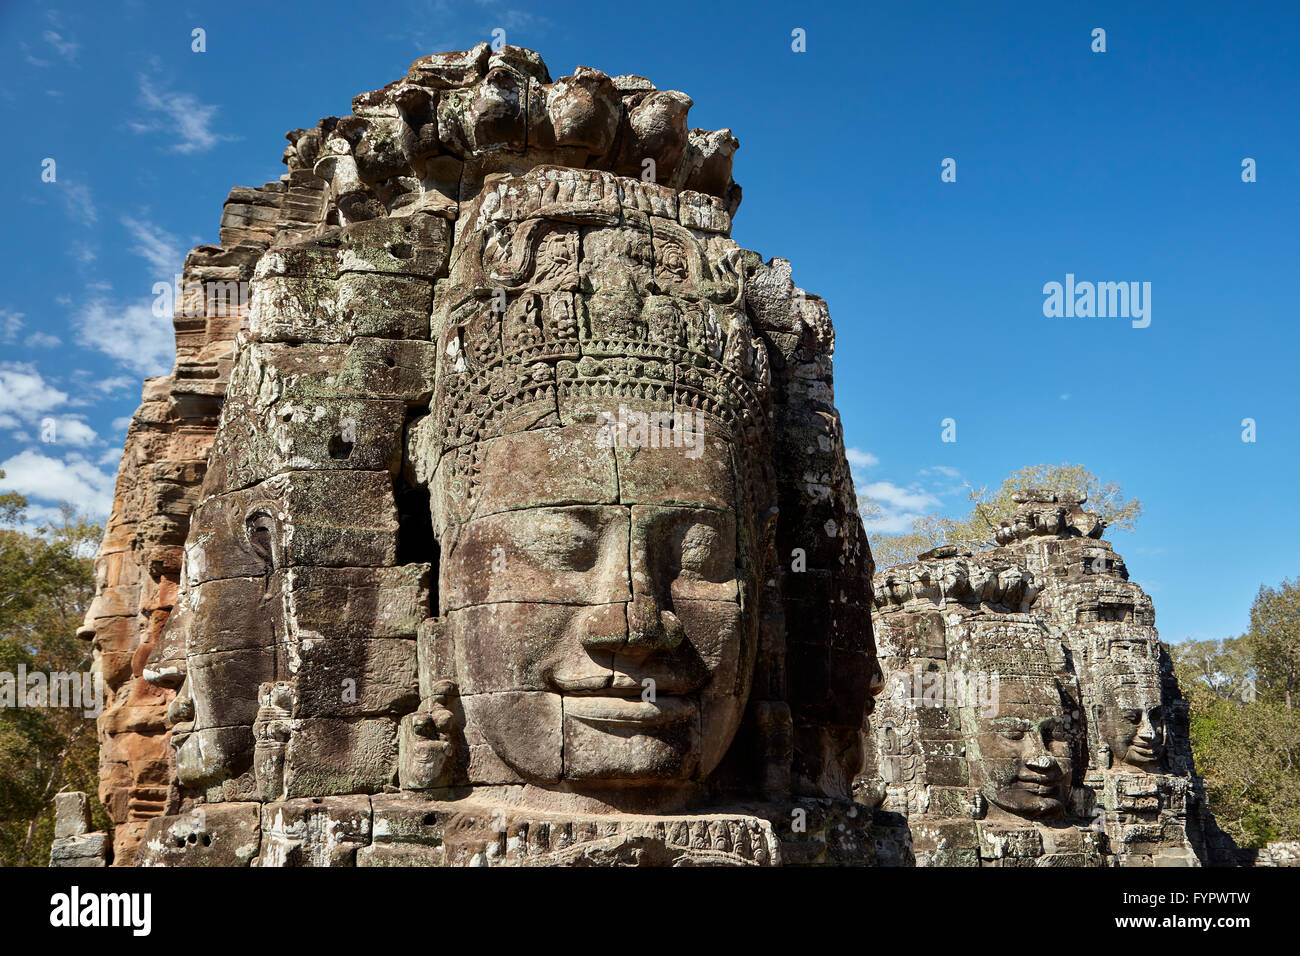 Faces, Bayon temple ruins, Angkor Thom (12th century temple complex), Angkor World Heritage Site, Siem Reap, Cambodia Stock Photo